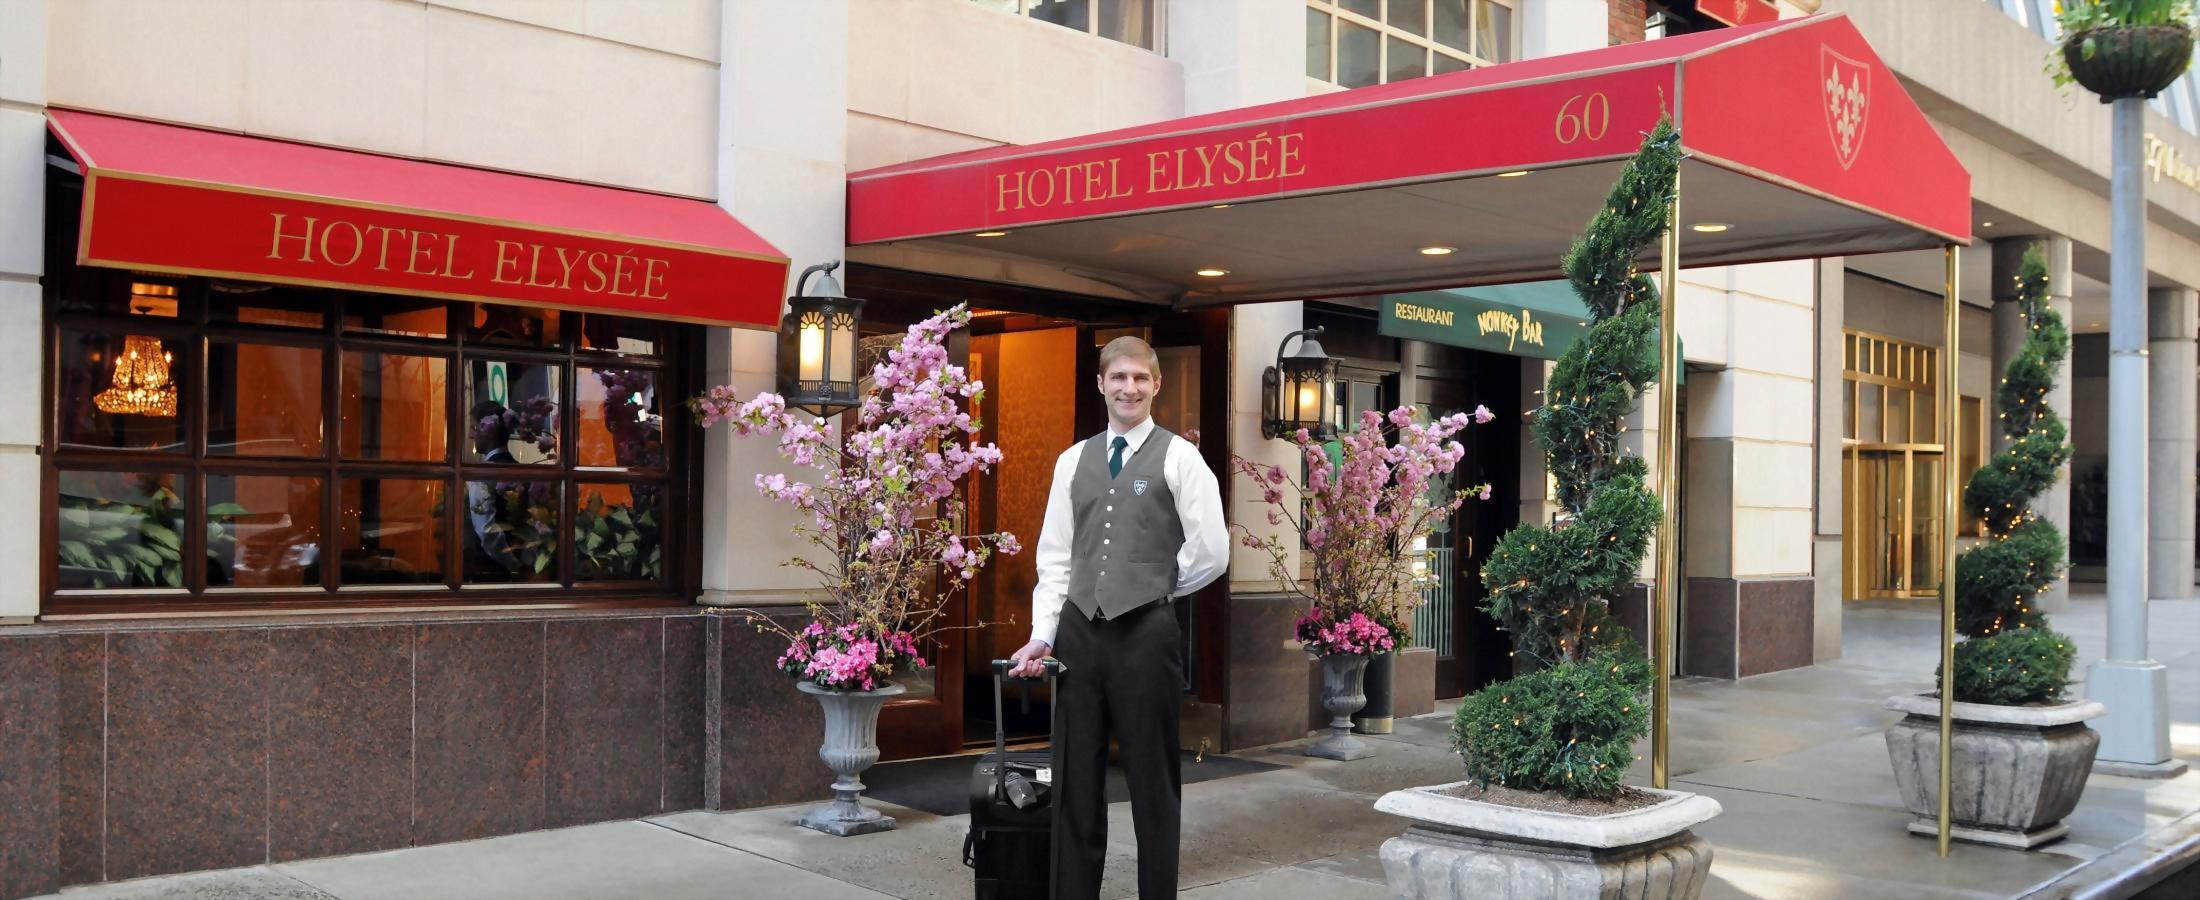 Welcome to the Hotel Elysée on 54th Street in New York City!  We can't wait to see you!